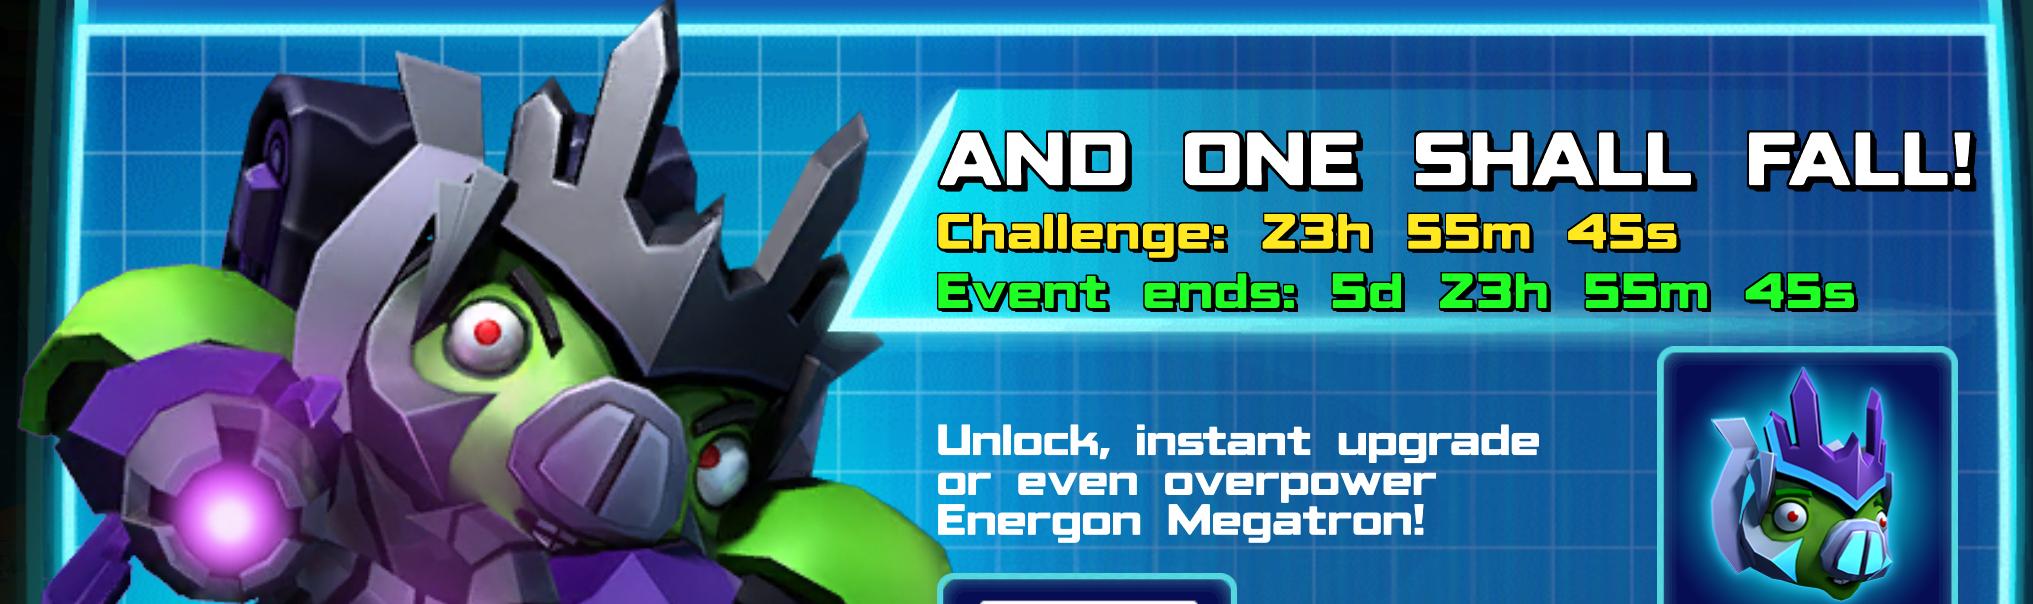 (Part of) The event banner for Ultimate Megatron